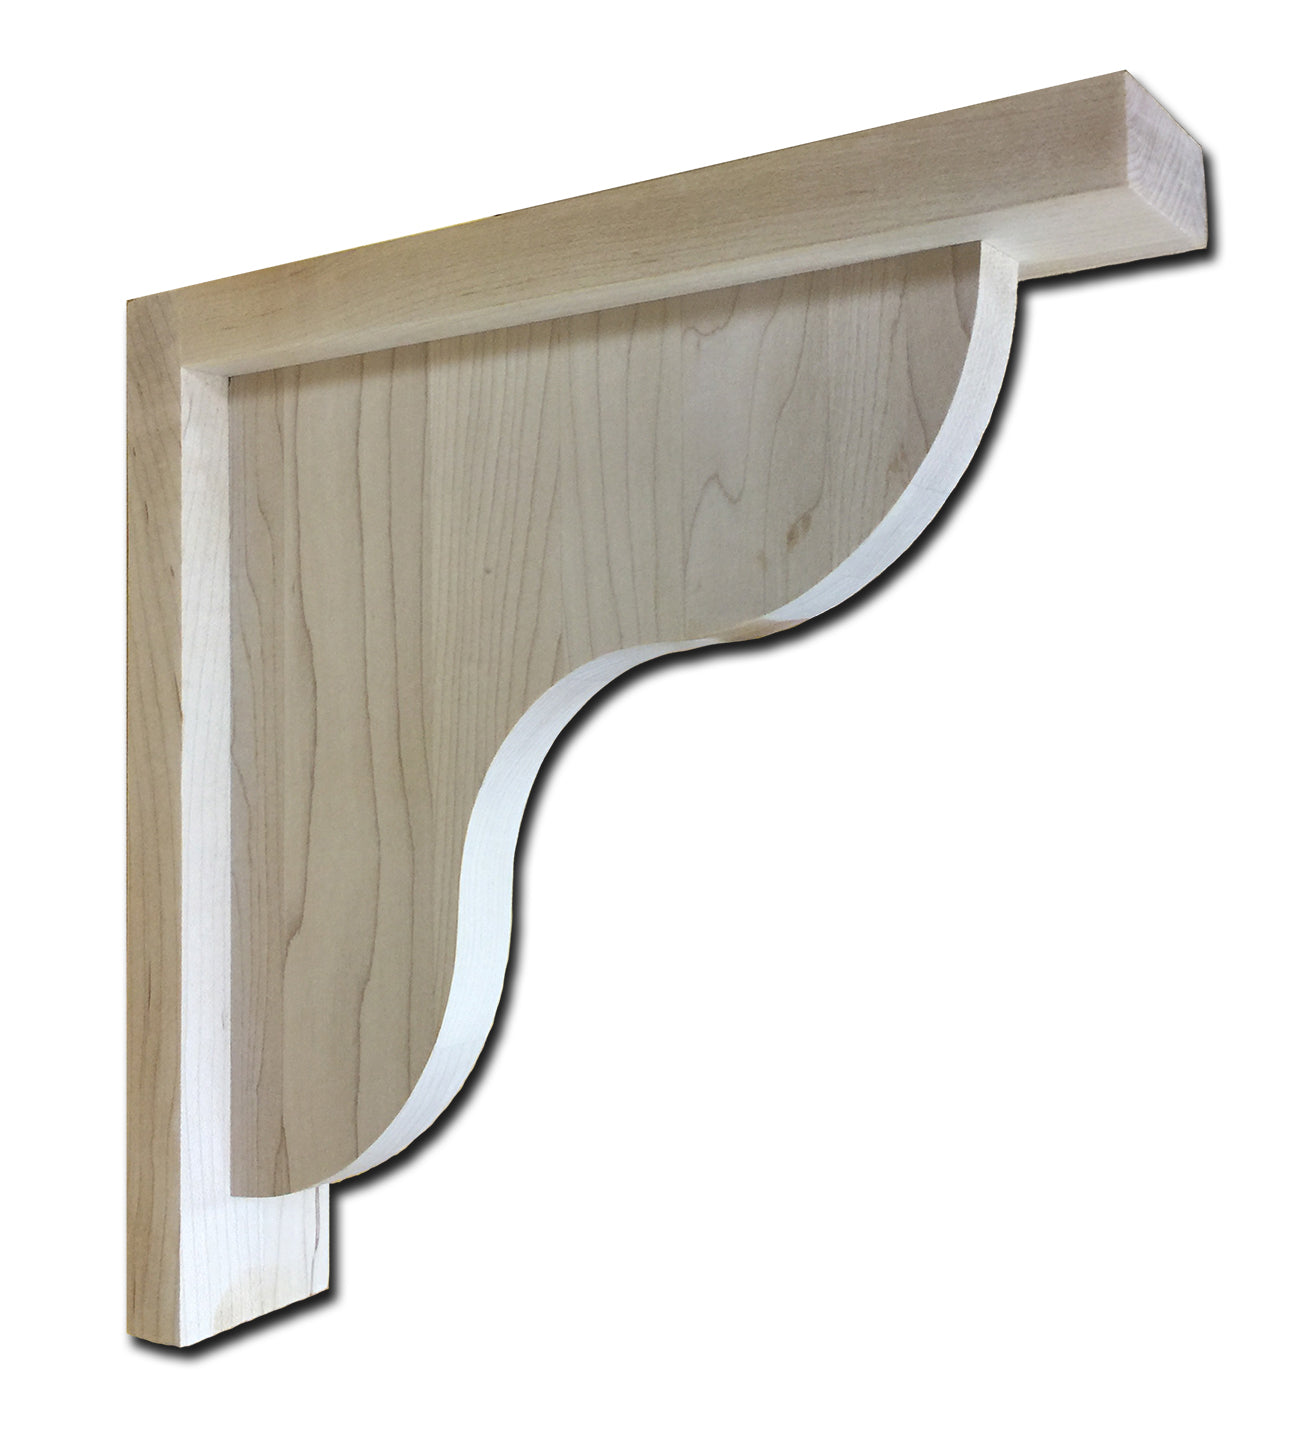 Castlewood SY-CA-BB14 Countertop Support